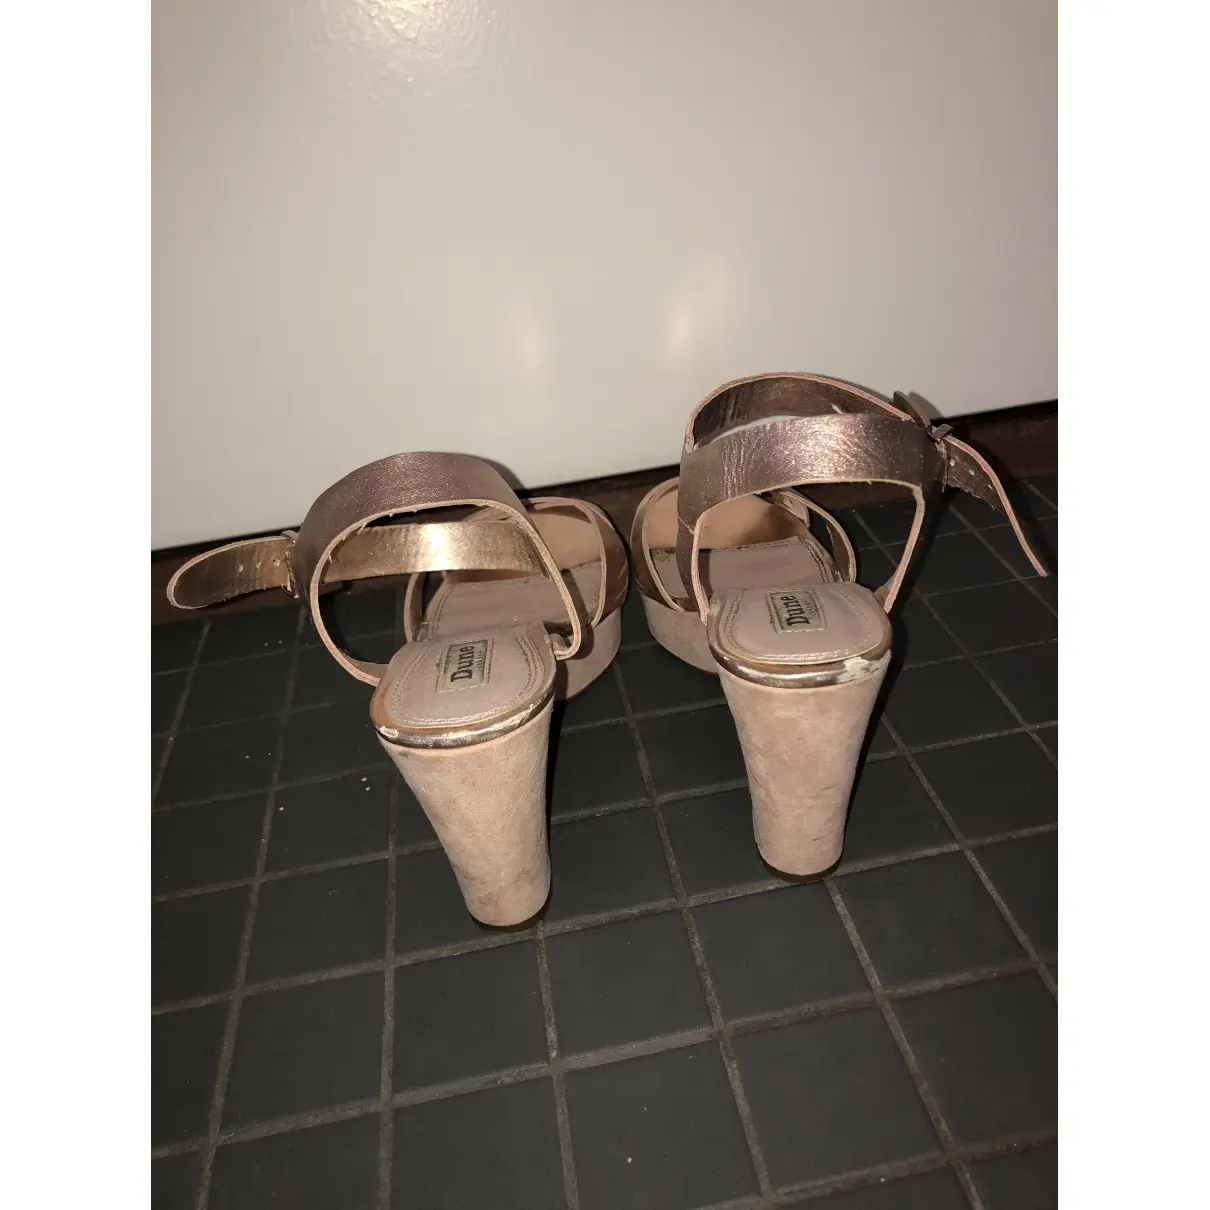 Dune Leather sandal for sale